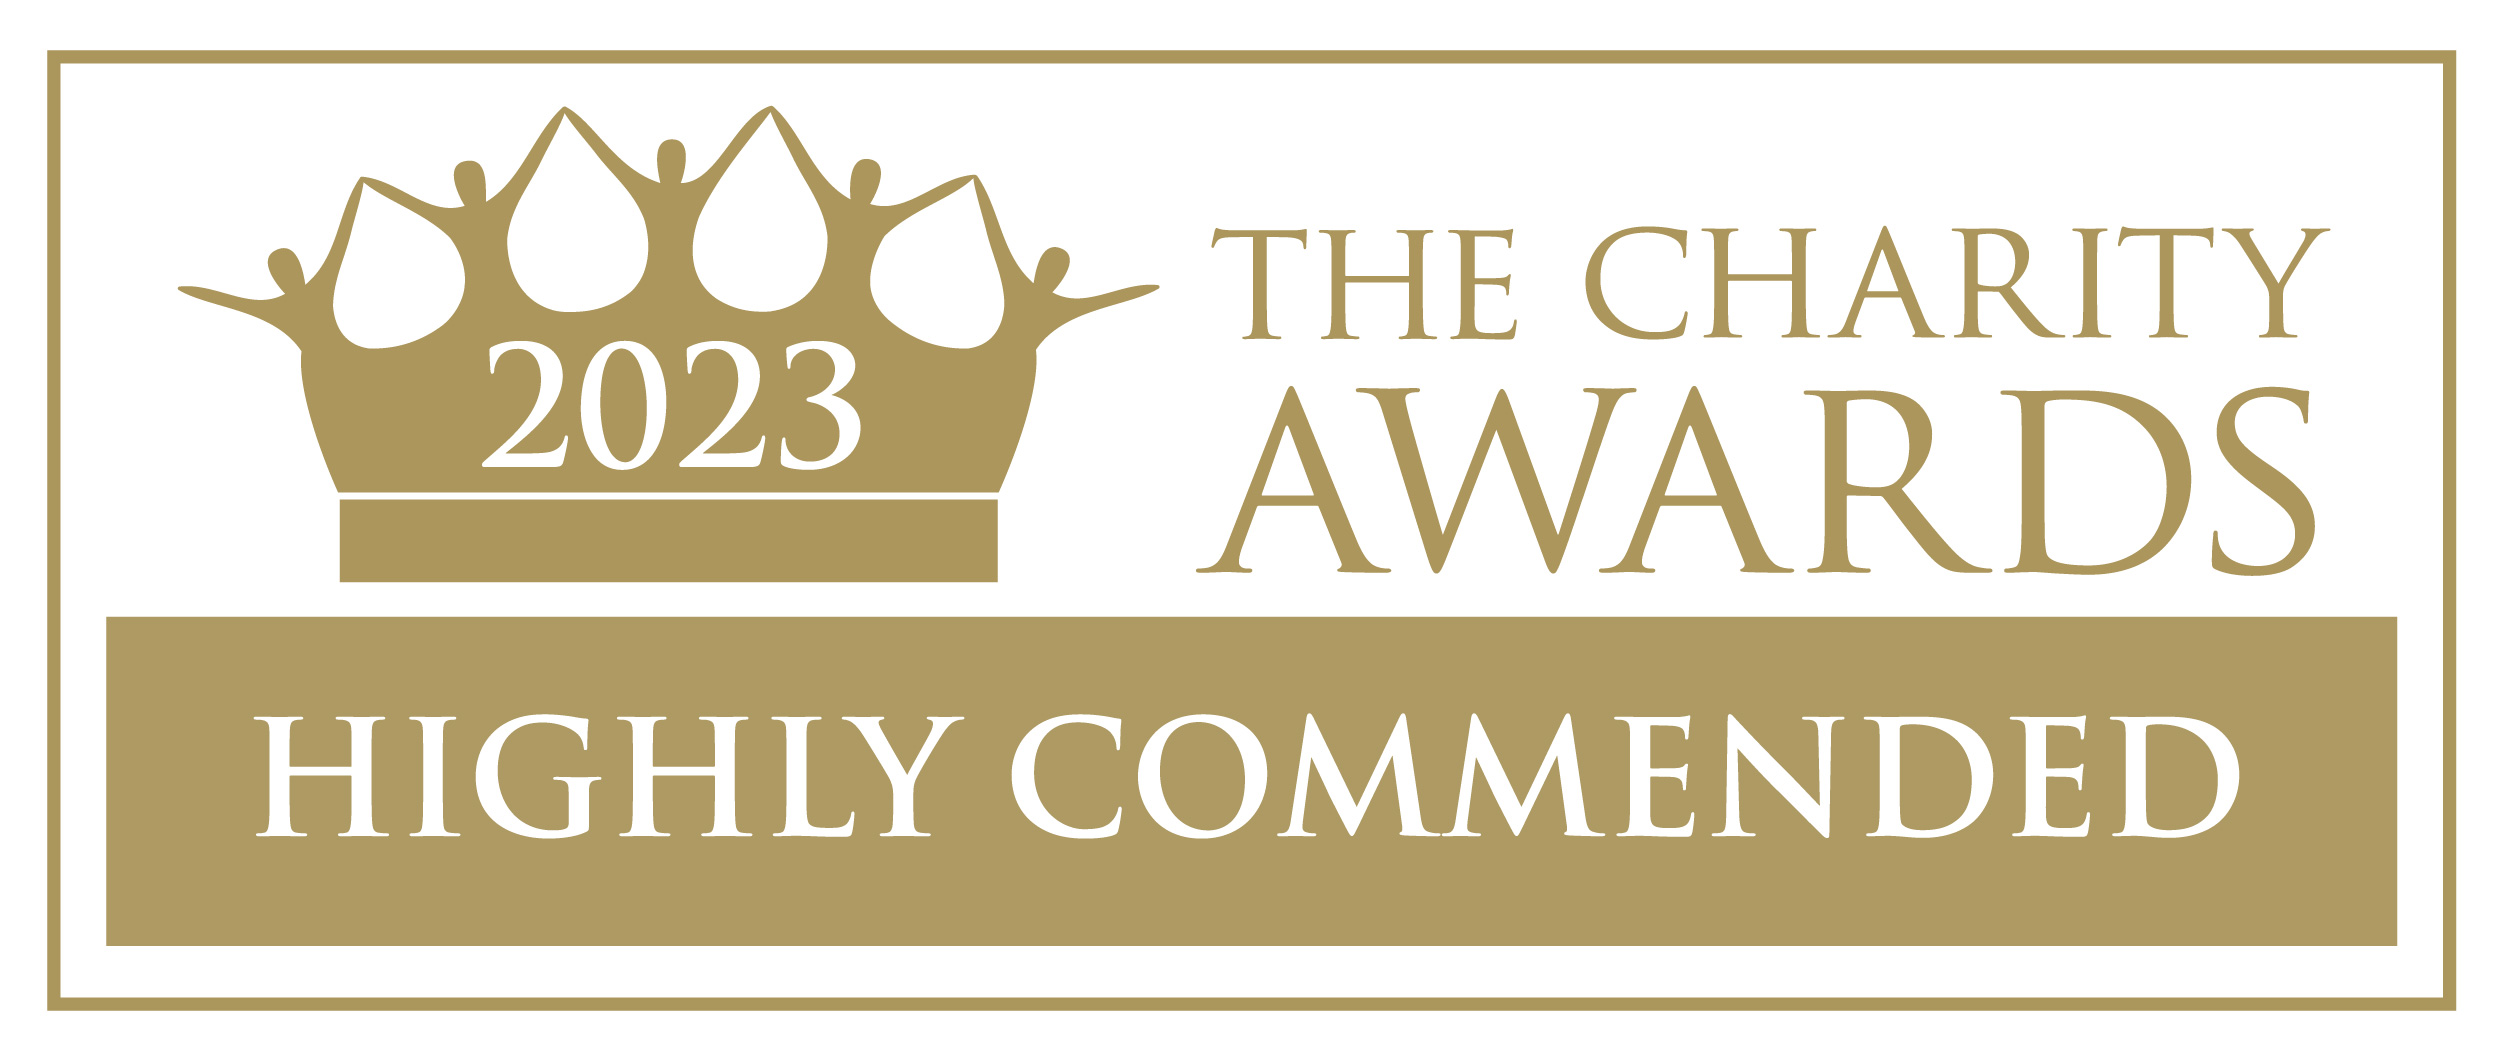 Charity Awards 2023 Highly Commended certification